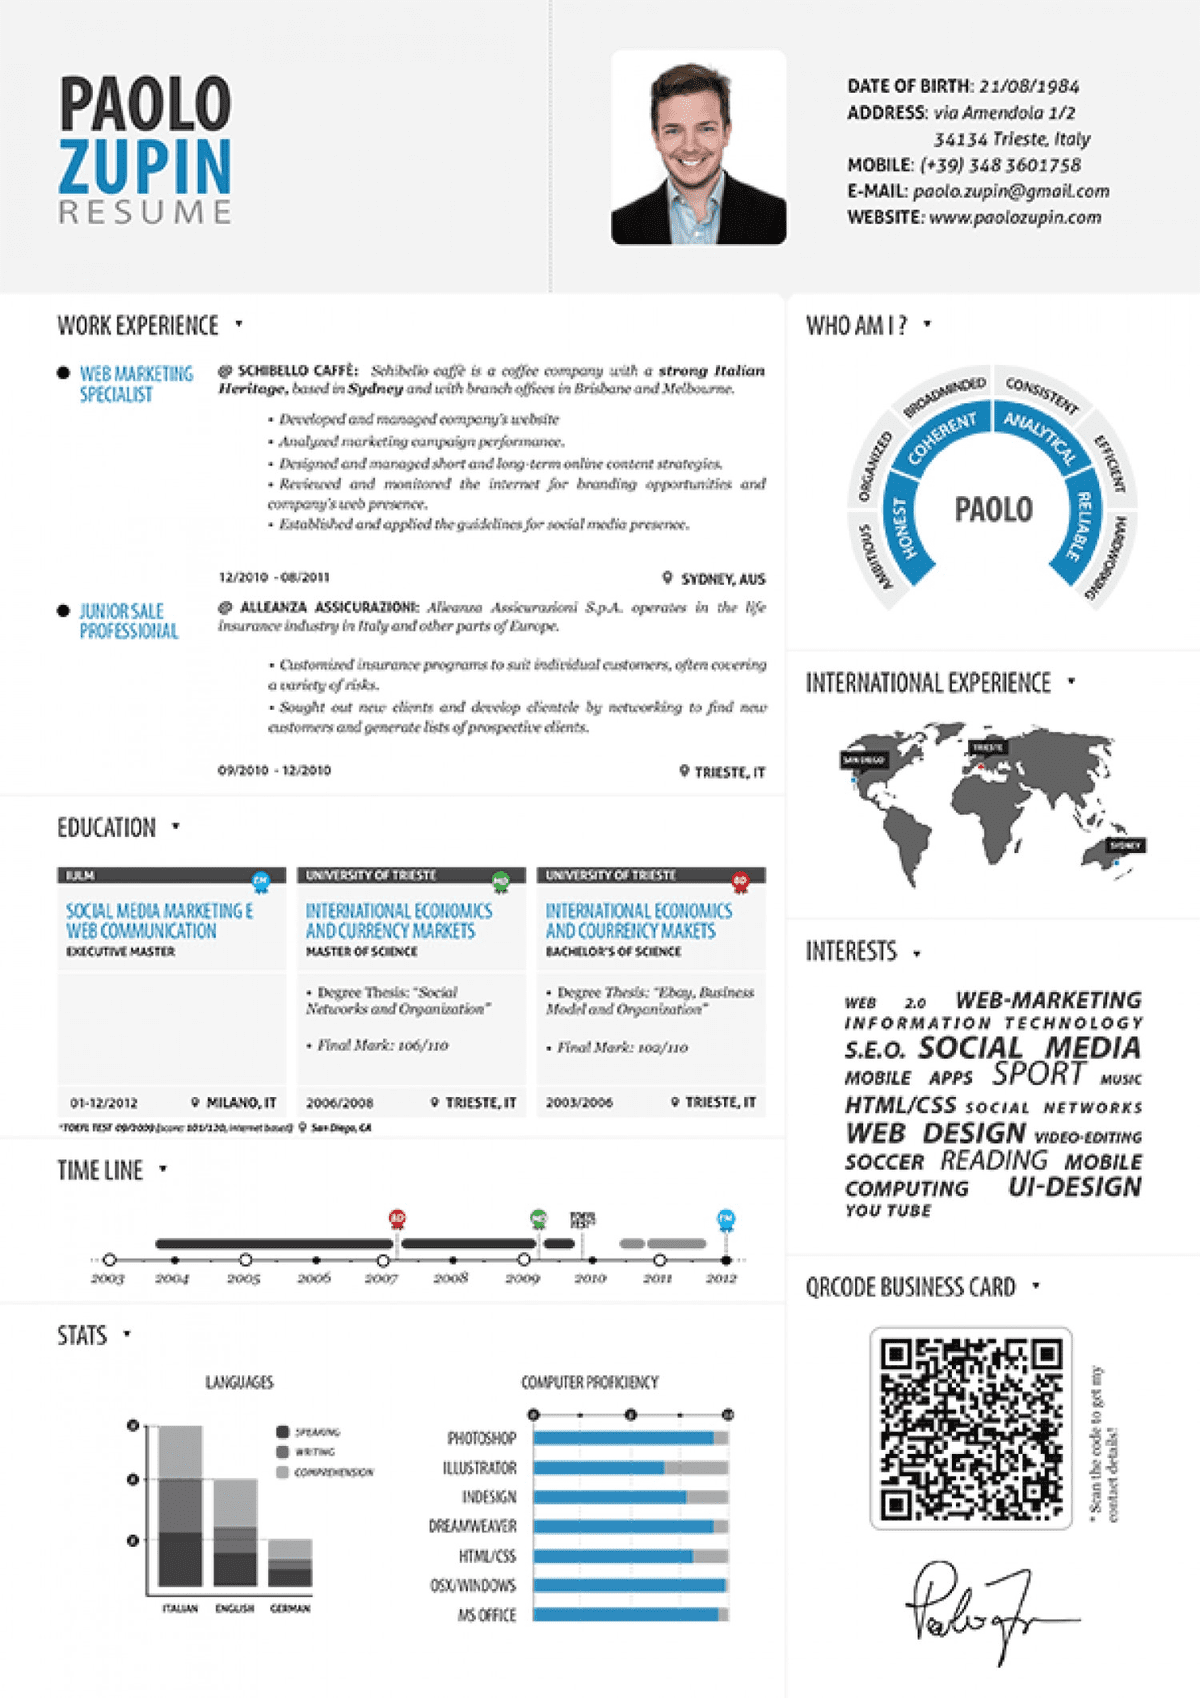 paolo-zupin--infographic-resume_502918c6064e8_w1500